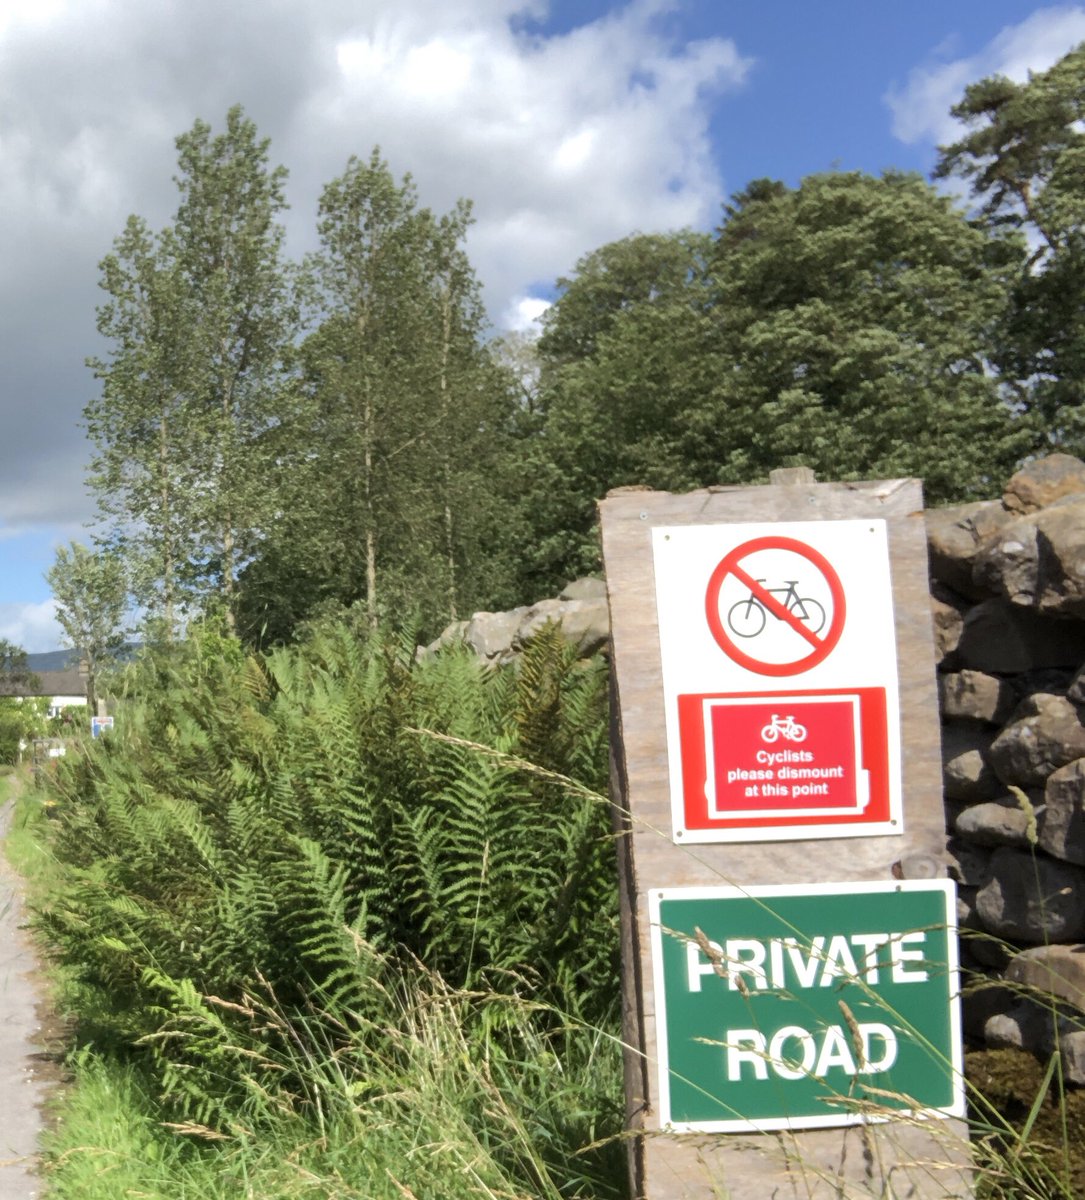 I then also got a more polite adhesive sign and put it over the NO CYCLING sign at the entrance to the lane. Anyway, while we were on holiday a friend sent us a pic of the absence of. NO CYCLING signs. They’ve all gone. No idea what happened. But they’re gone. 19/.